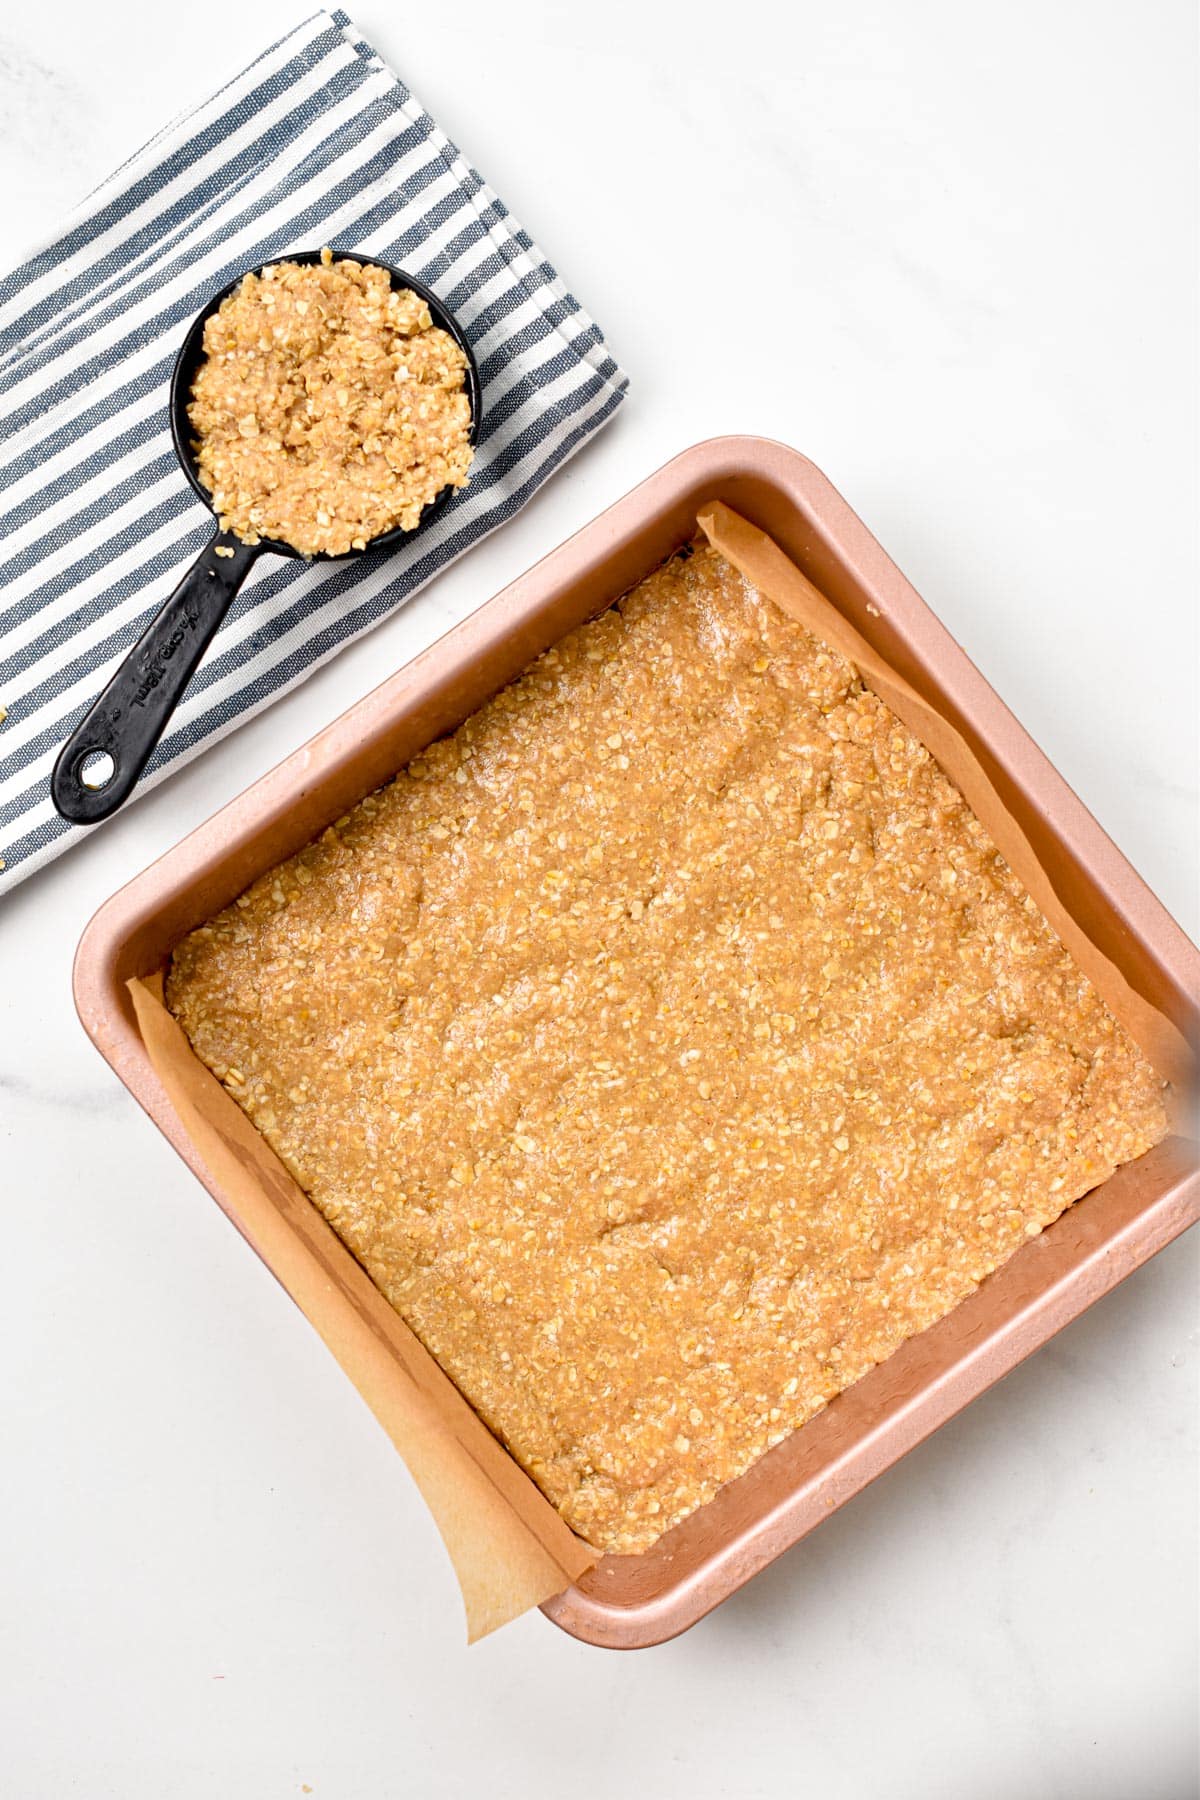 A square pan filled with a layer of oatmeal mixture and a 1/2 cup measuring cup filled with remaining batter.